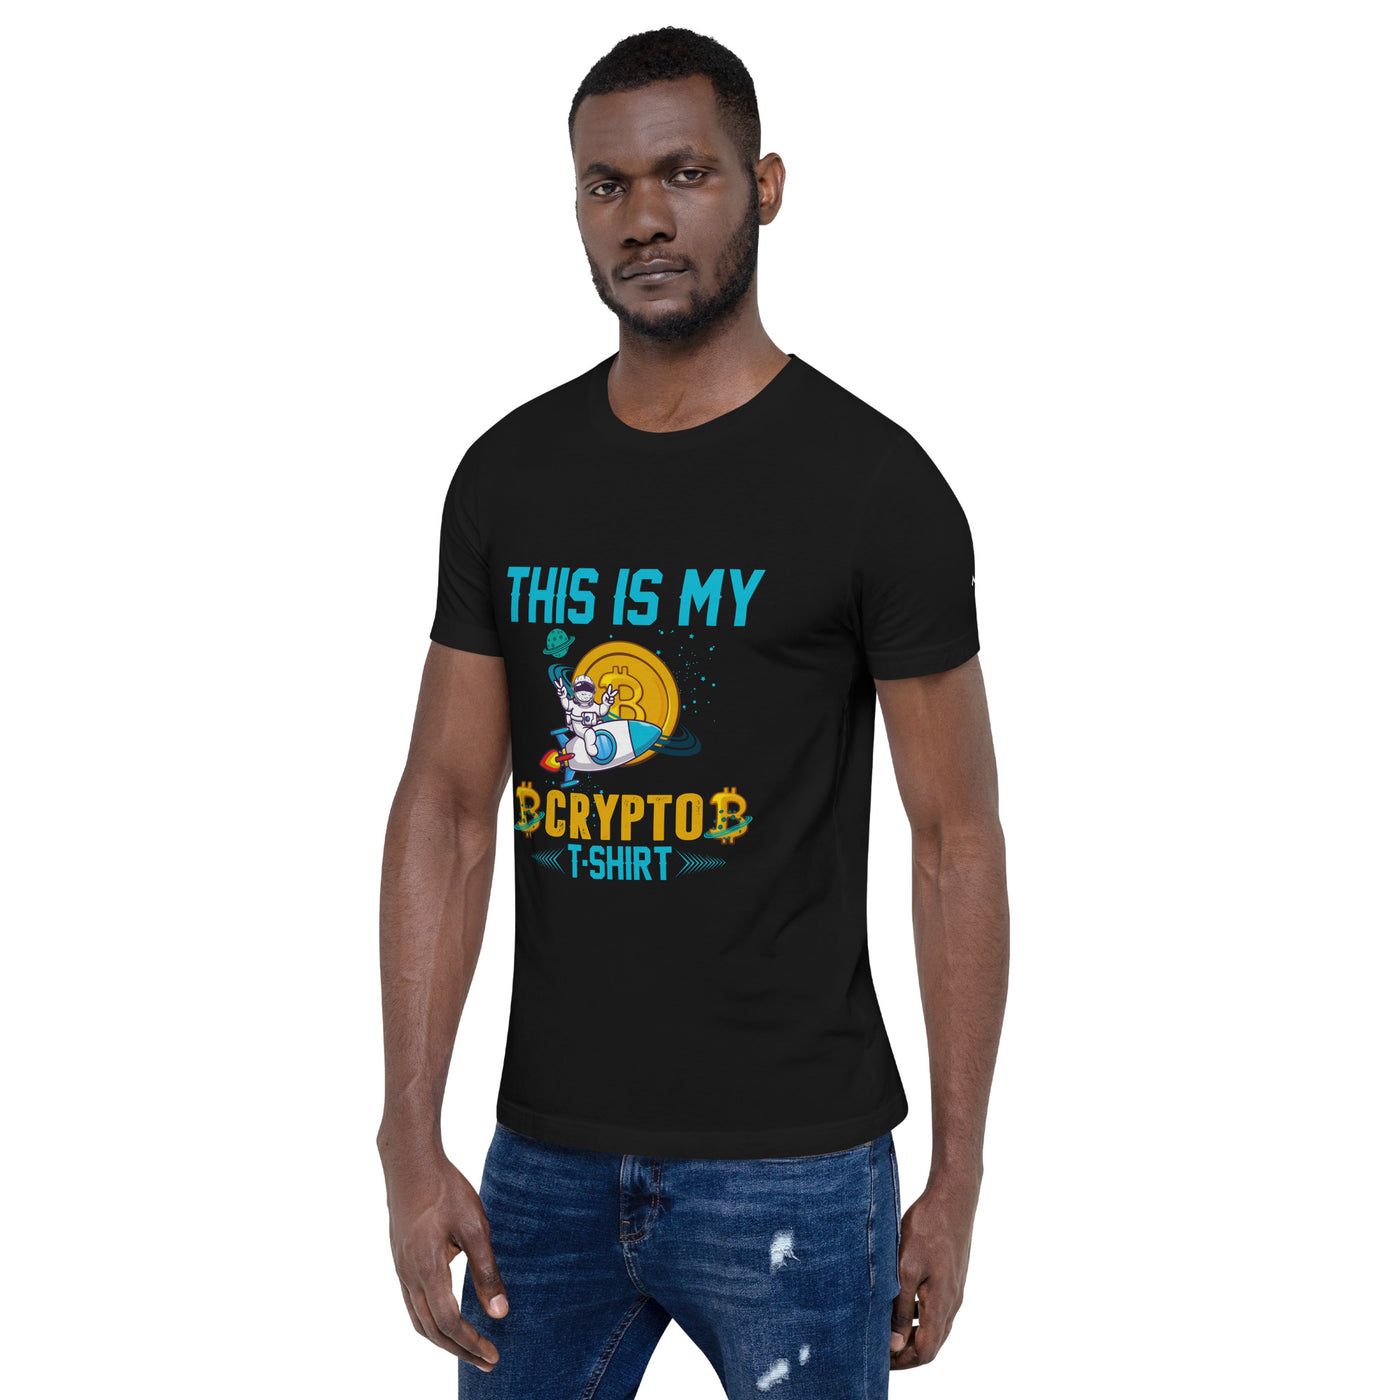 This is my Crypto T-shirt with Turtle Ninja and Missile - Unisex t-shirt